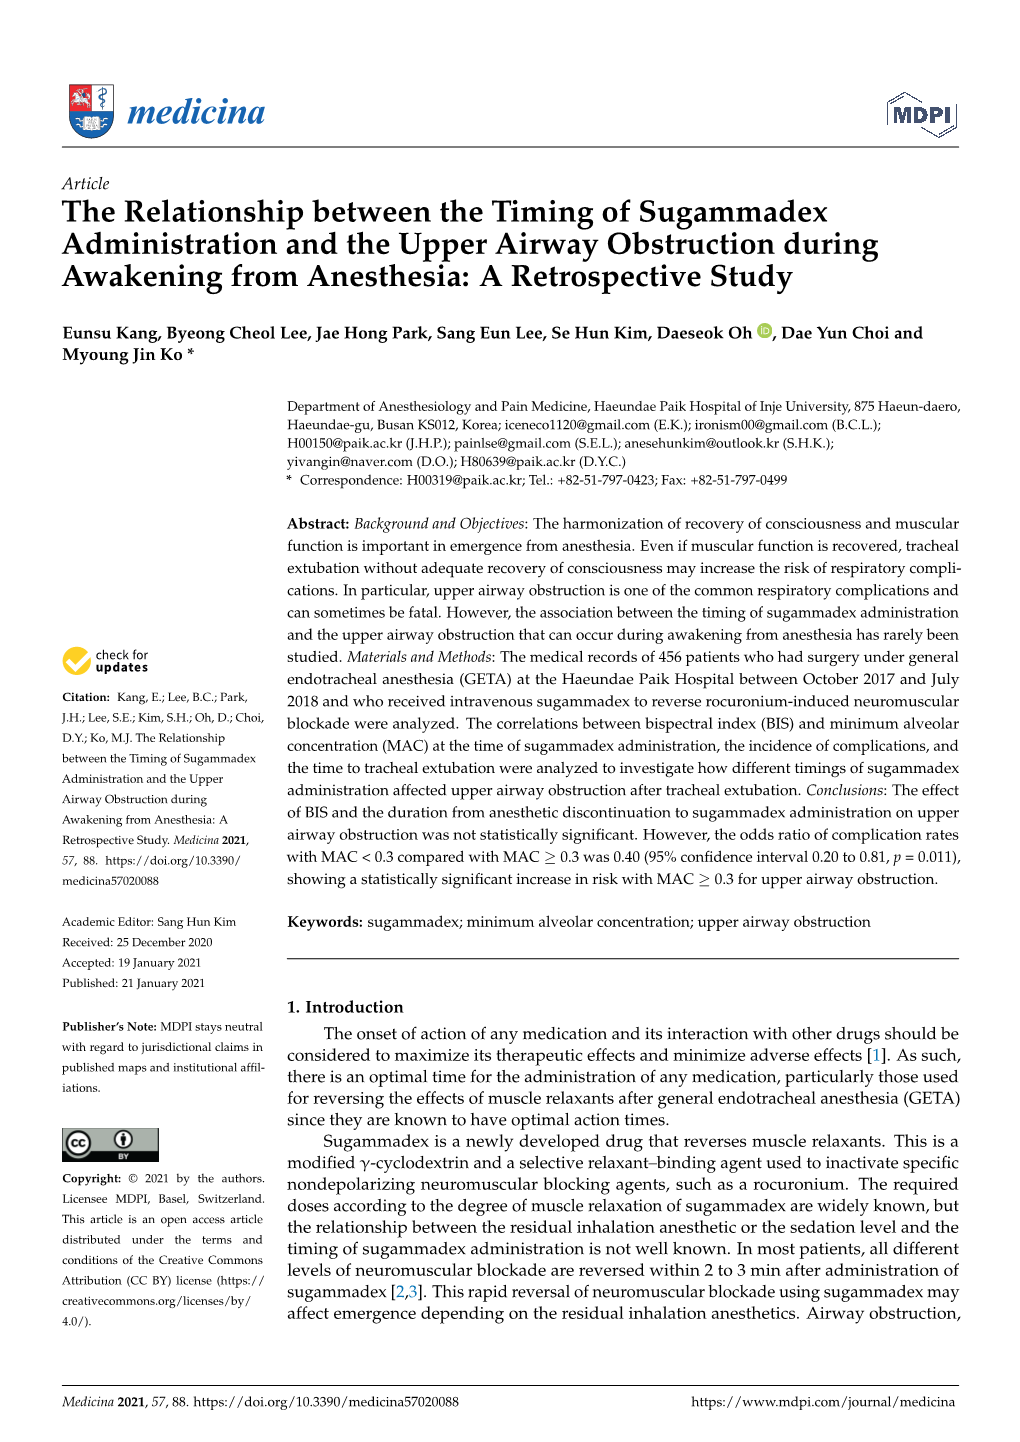 The Relationship Between the Timing of Sugammadex Administration and the Upper Airway Obstruction During Awakening from Anesthesia: a Retrospective Study